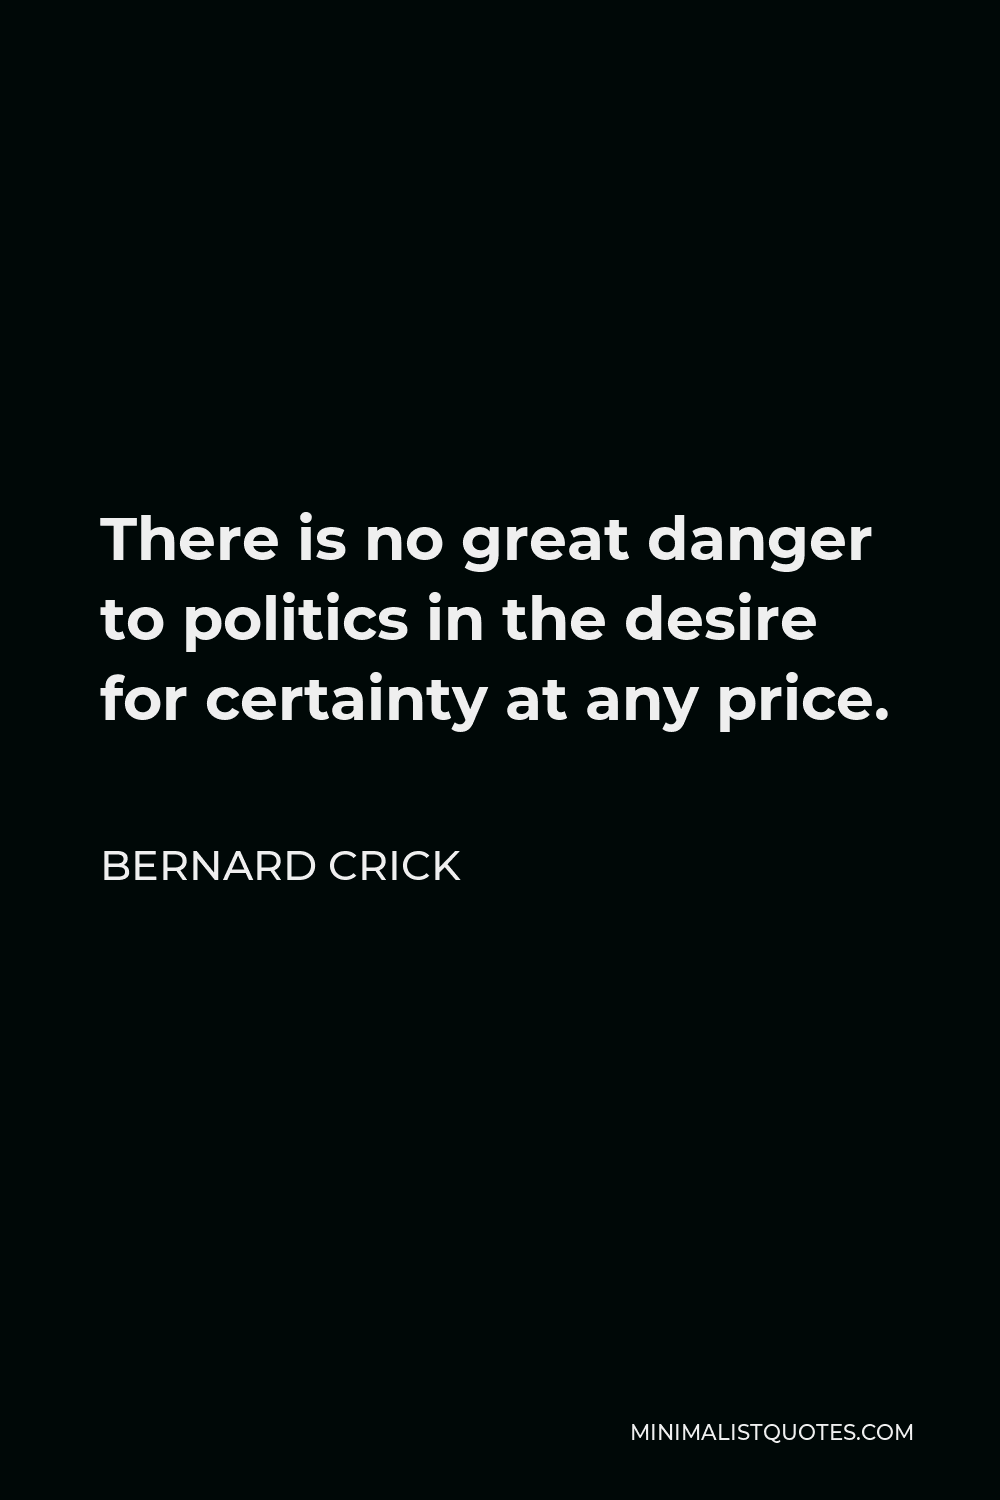 Bernard Crick Quote - There is no great danger to politics in the desire for certainty at any price.